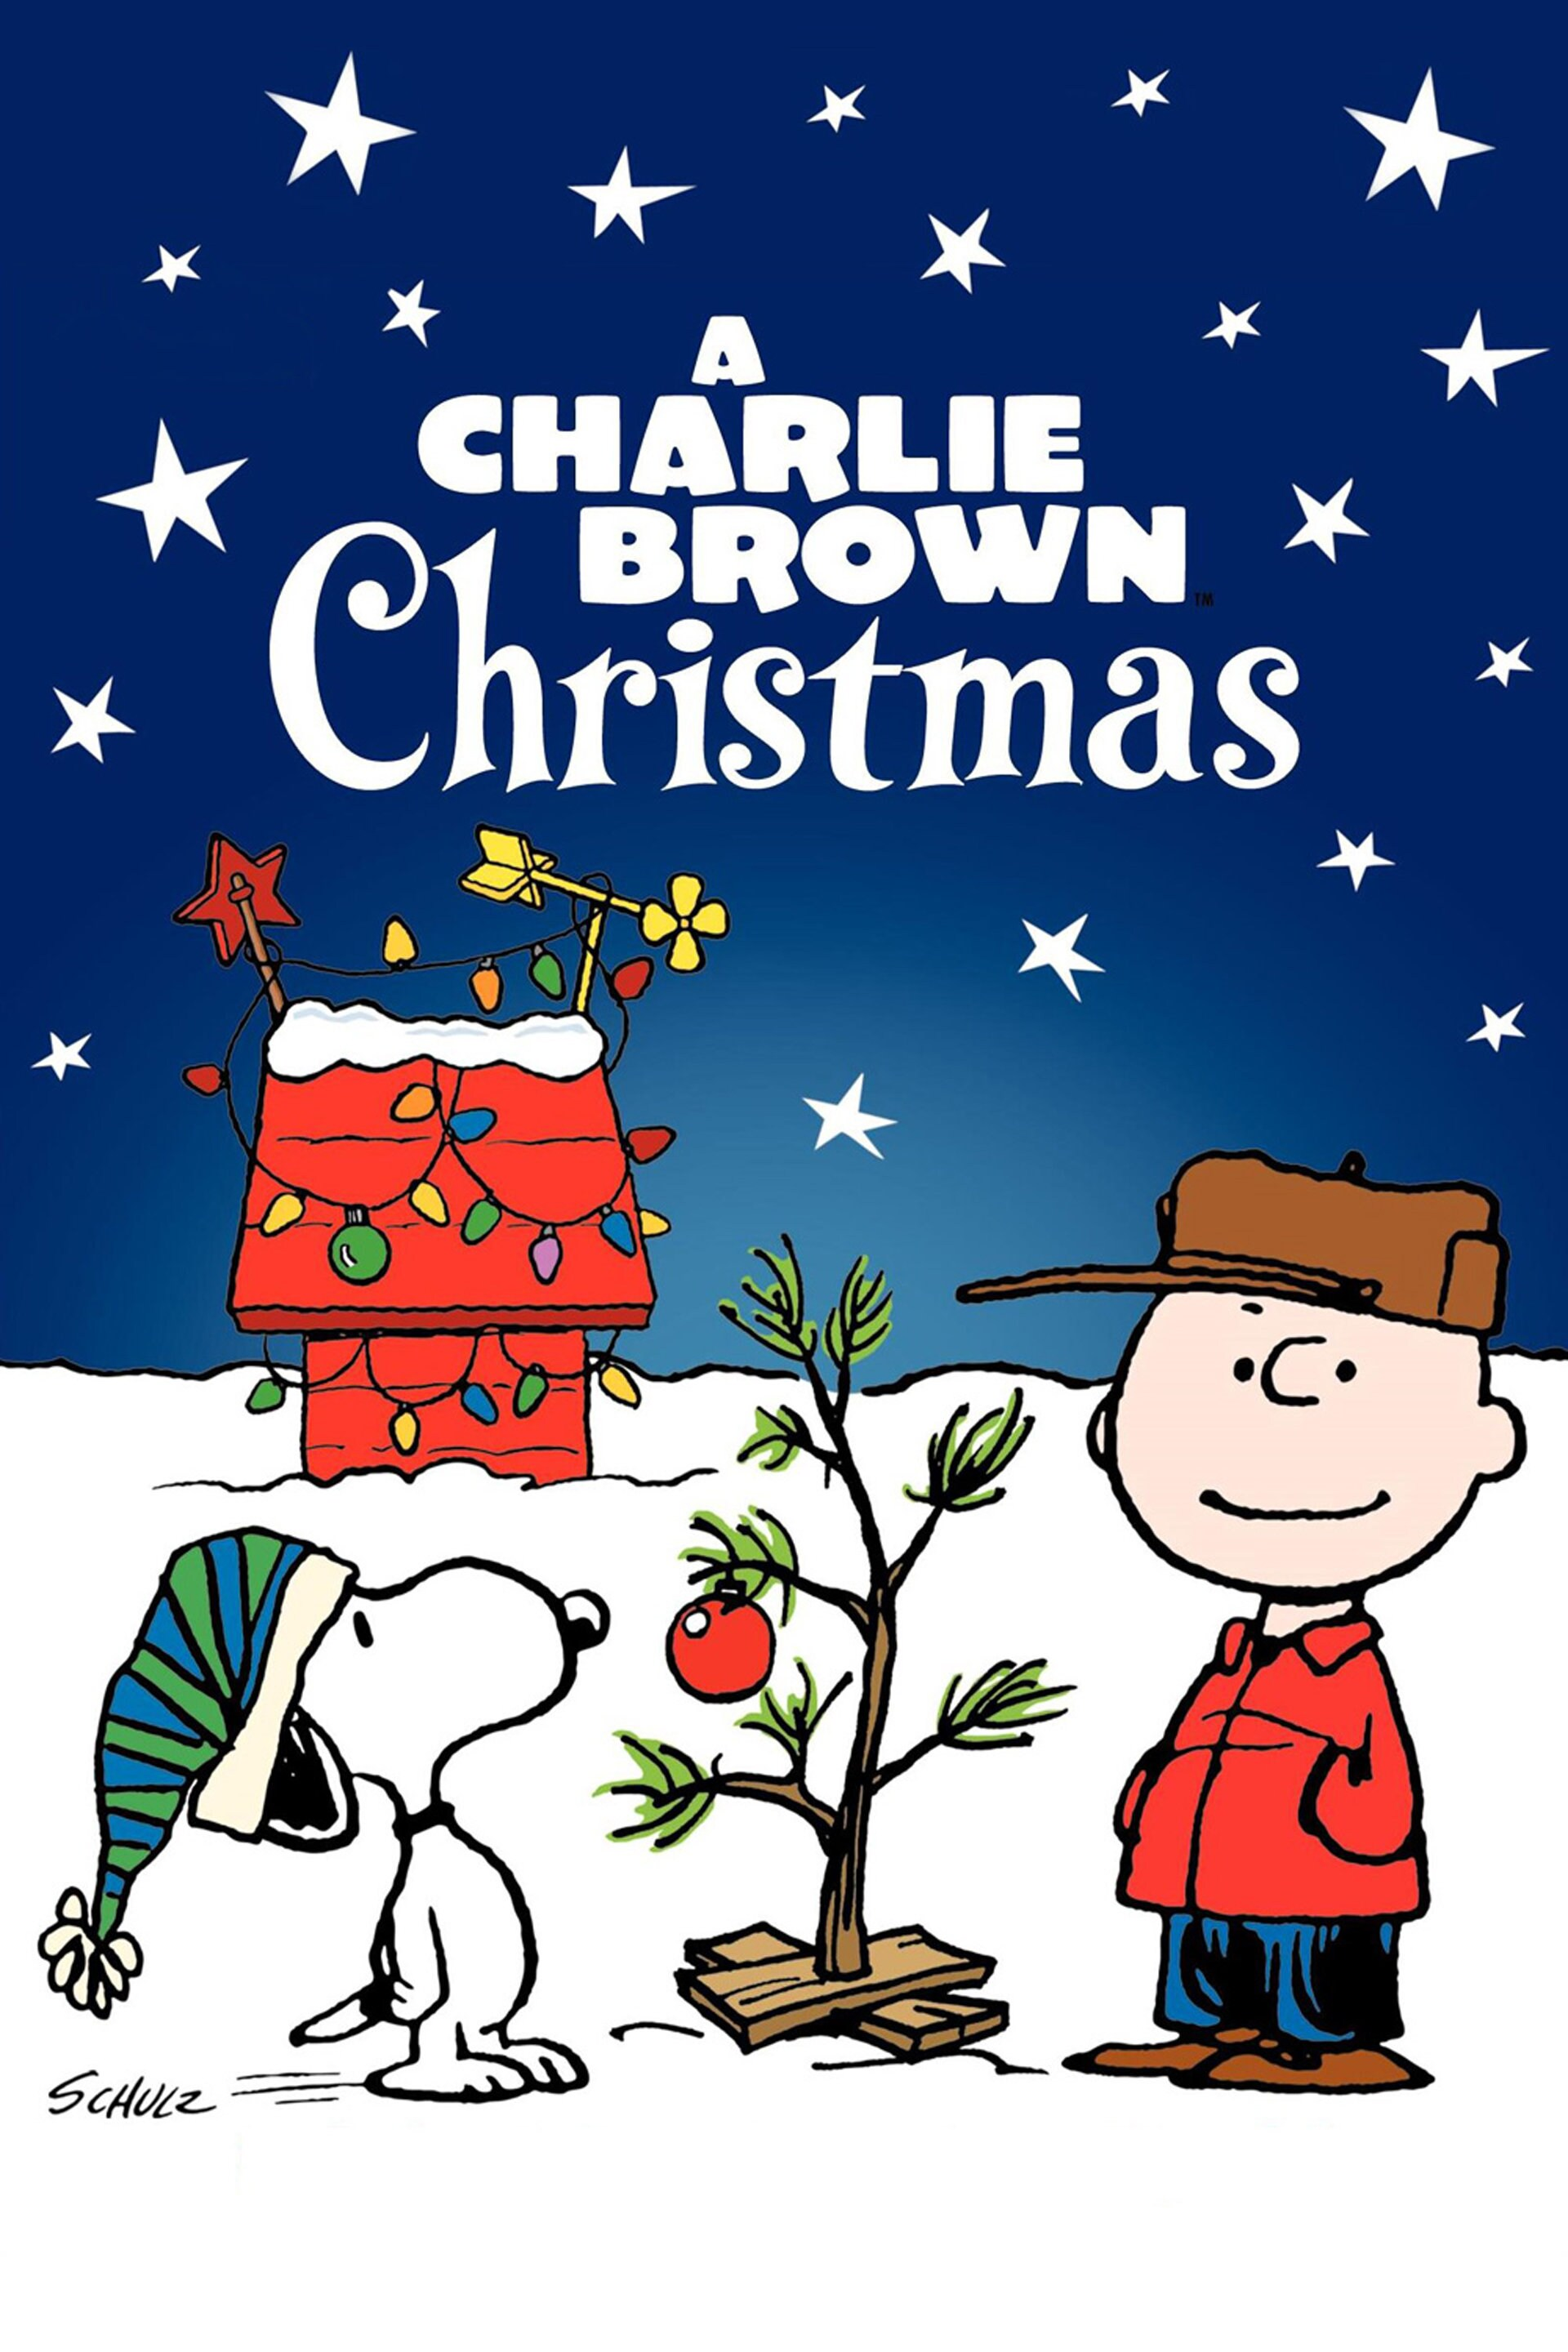 A Charlie Brown Christmas" (1965): A Timeless Holiday Classic